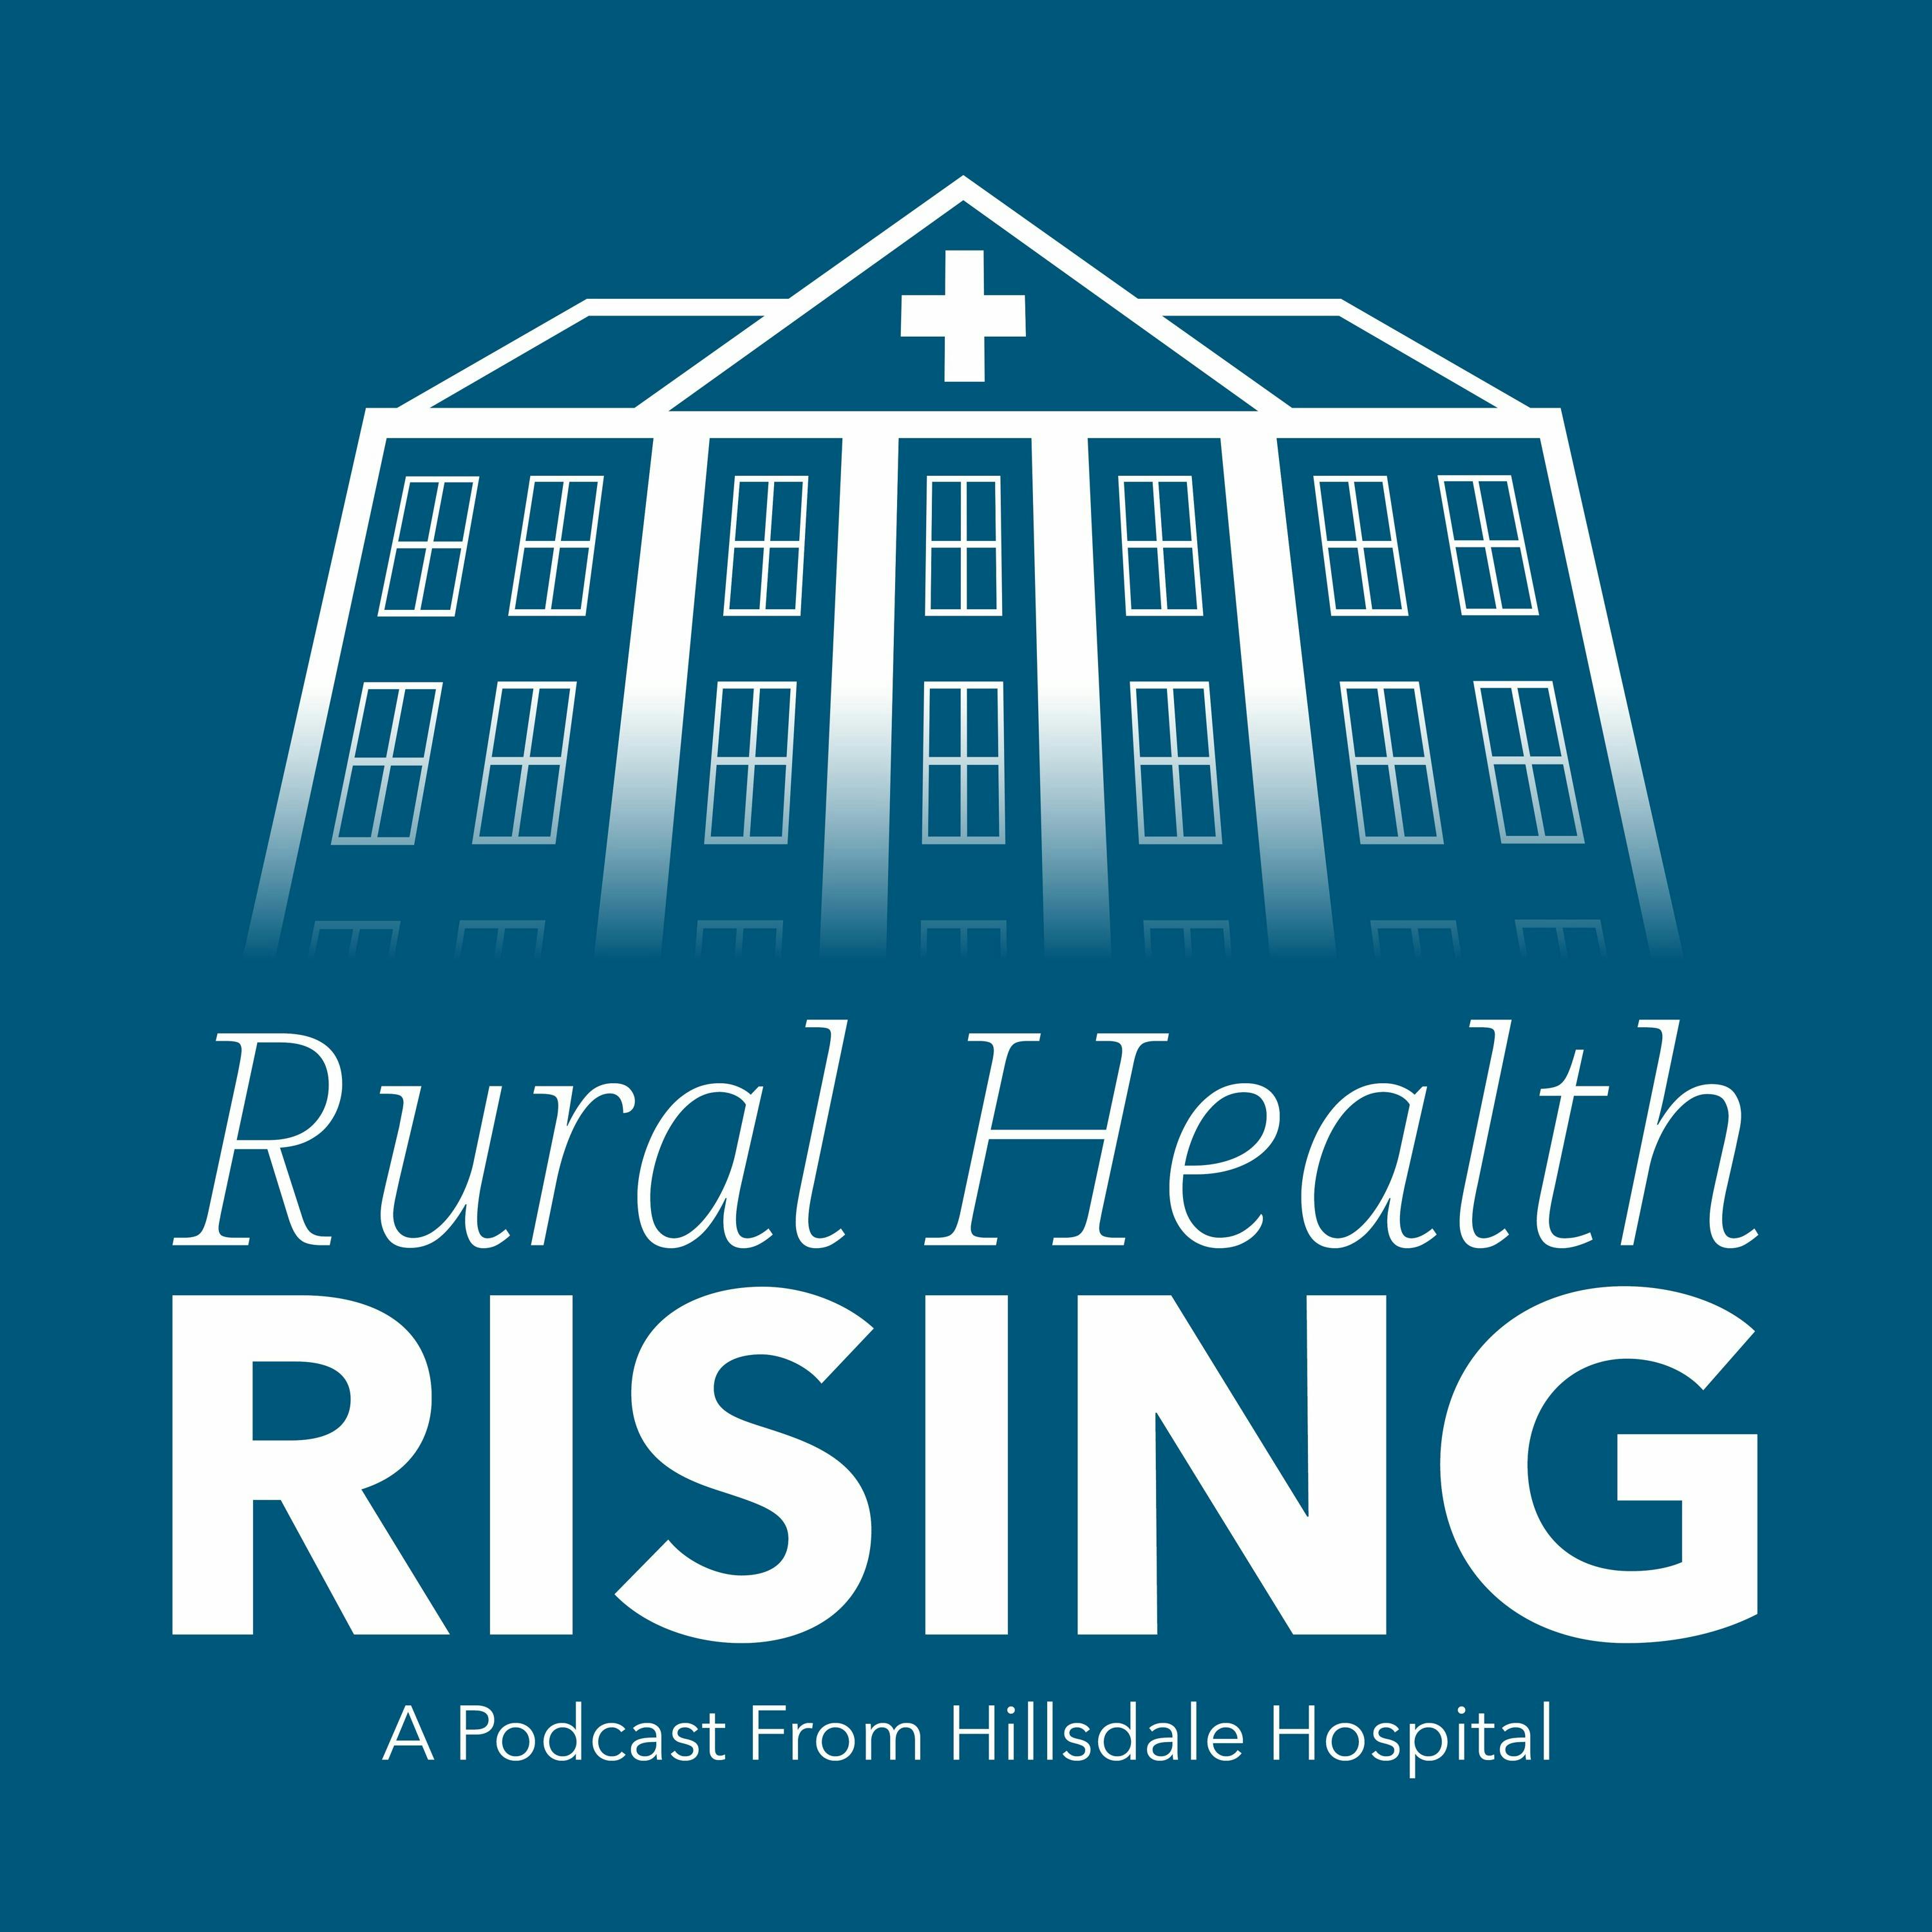 Episode 3: Quality & Safety in Rural Hospitals